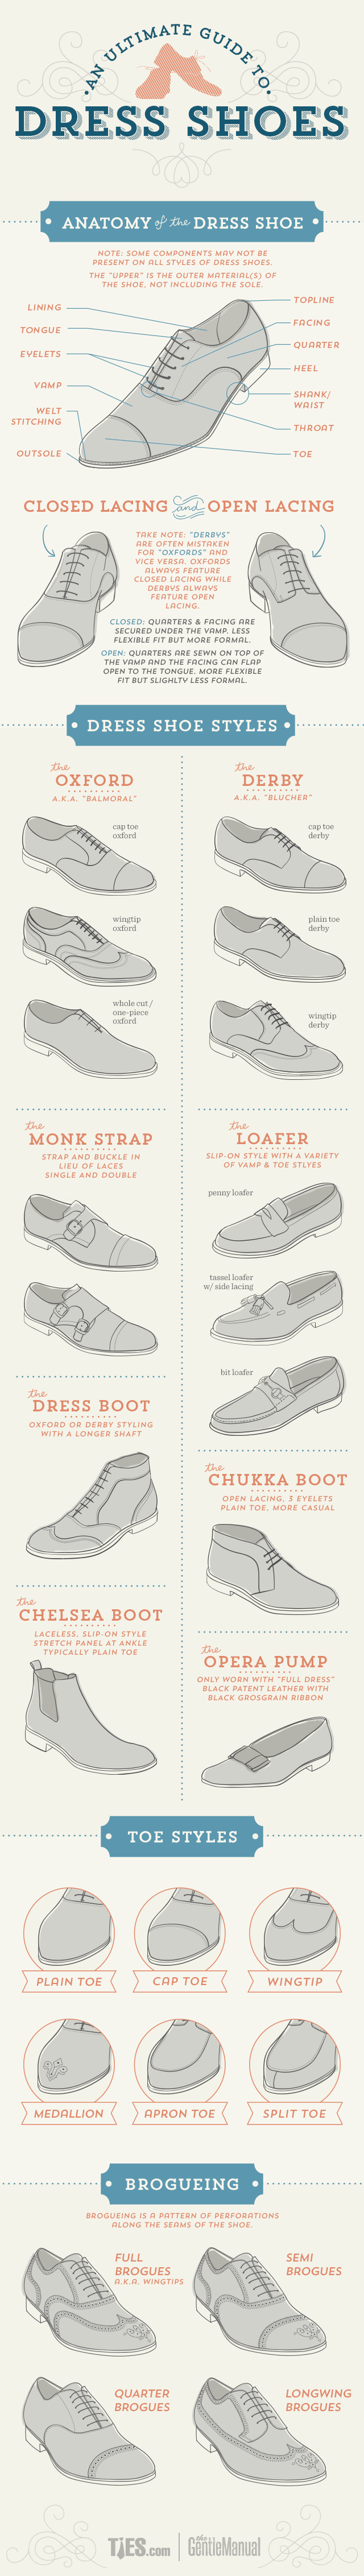 Ultimate Guide to Dress Shoes